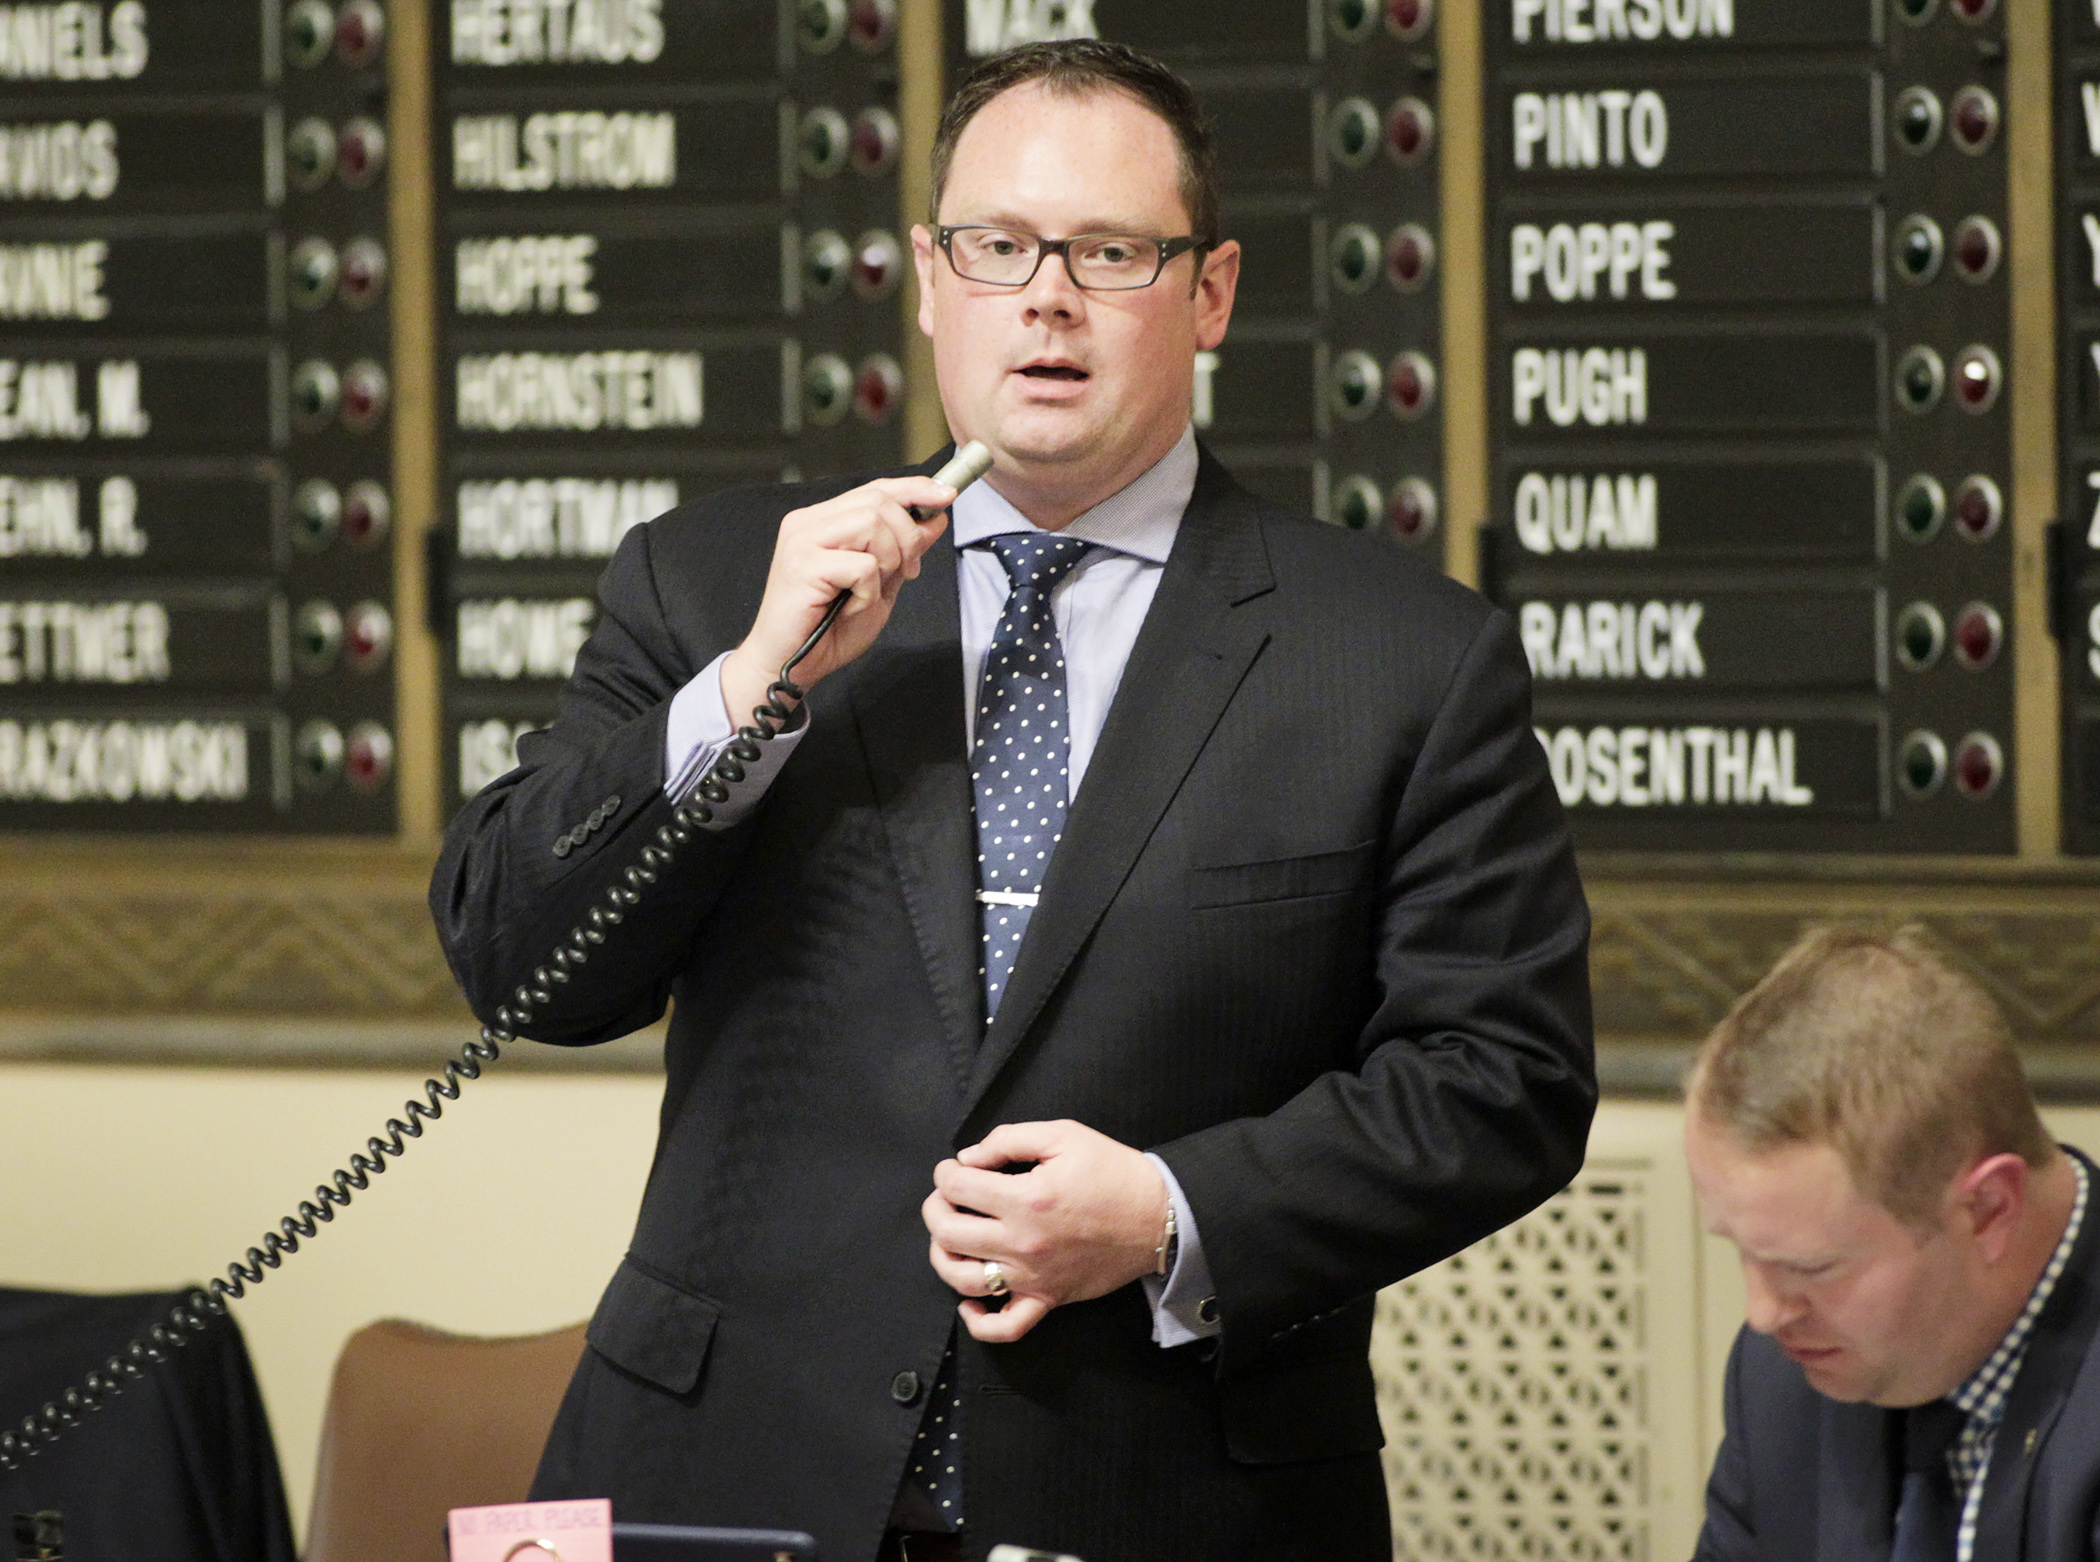 Rep. Tim Sanders explains provisions of his bill, SF2985, which would establish a presidential nomination primary. Photo by Paul Battaglia